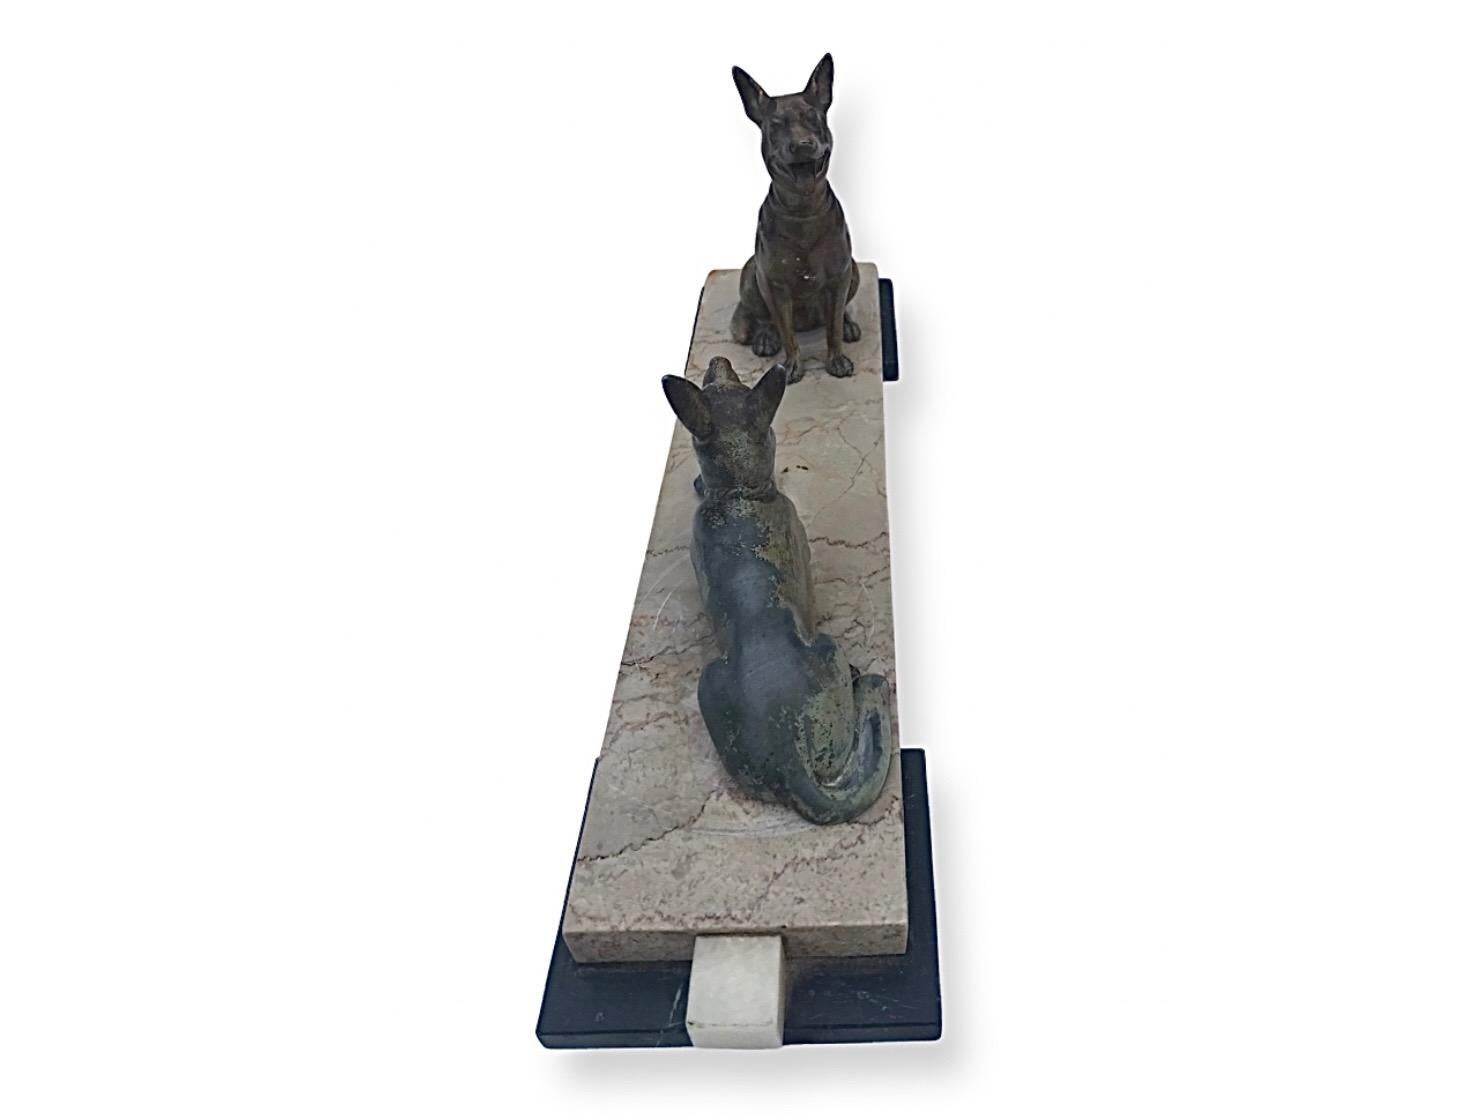 A wonderful Art Deco original decorative pair of cold painted Alsatians. Lovely details on both dogs, one seated and one laying down. These are in excellent original condition with no losses just a little wear to the finish on the Spelter. The